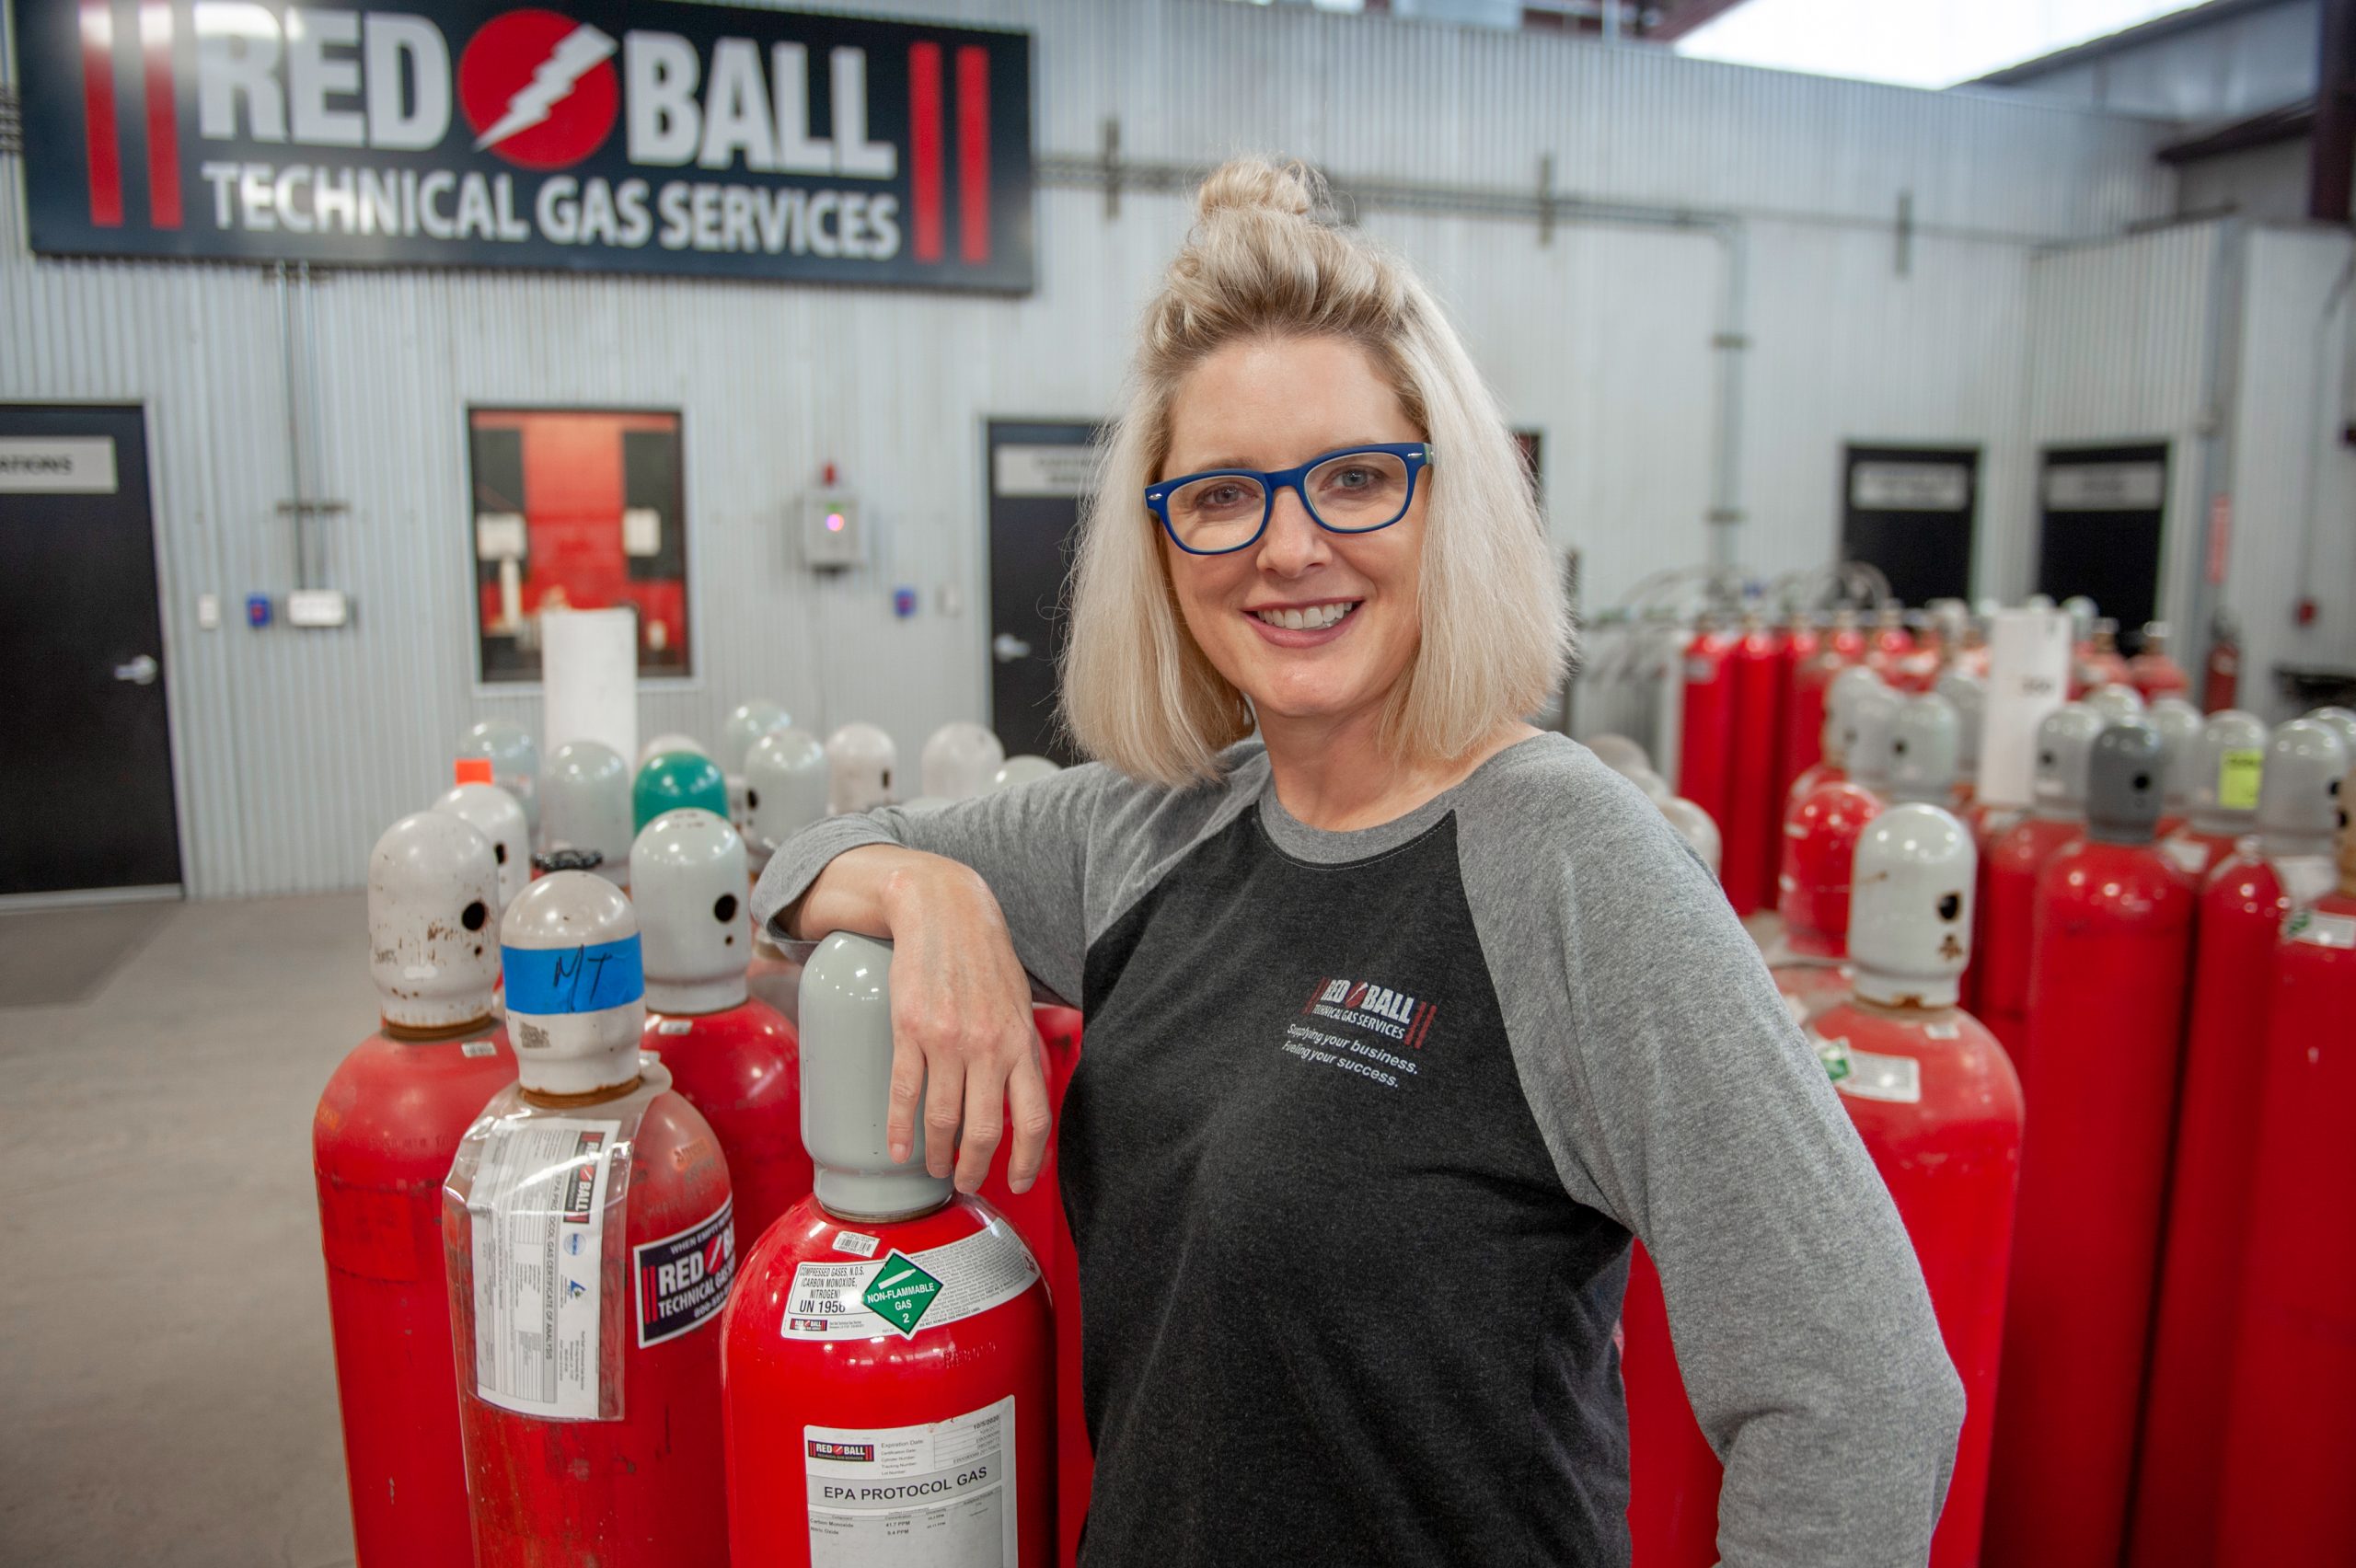 Red Ball Technical Gas Services Customer Service Manager